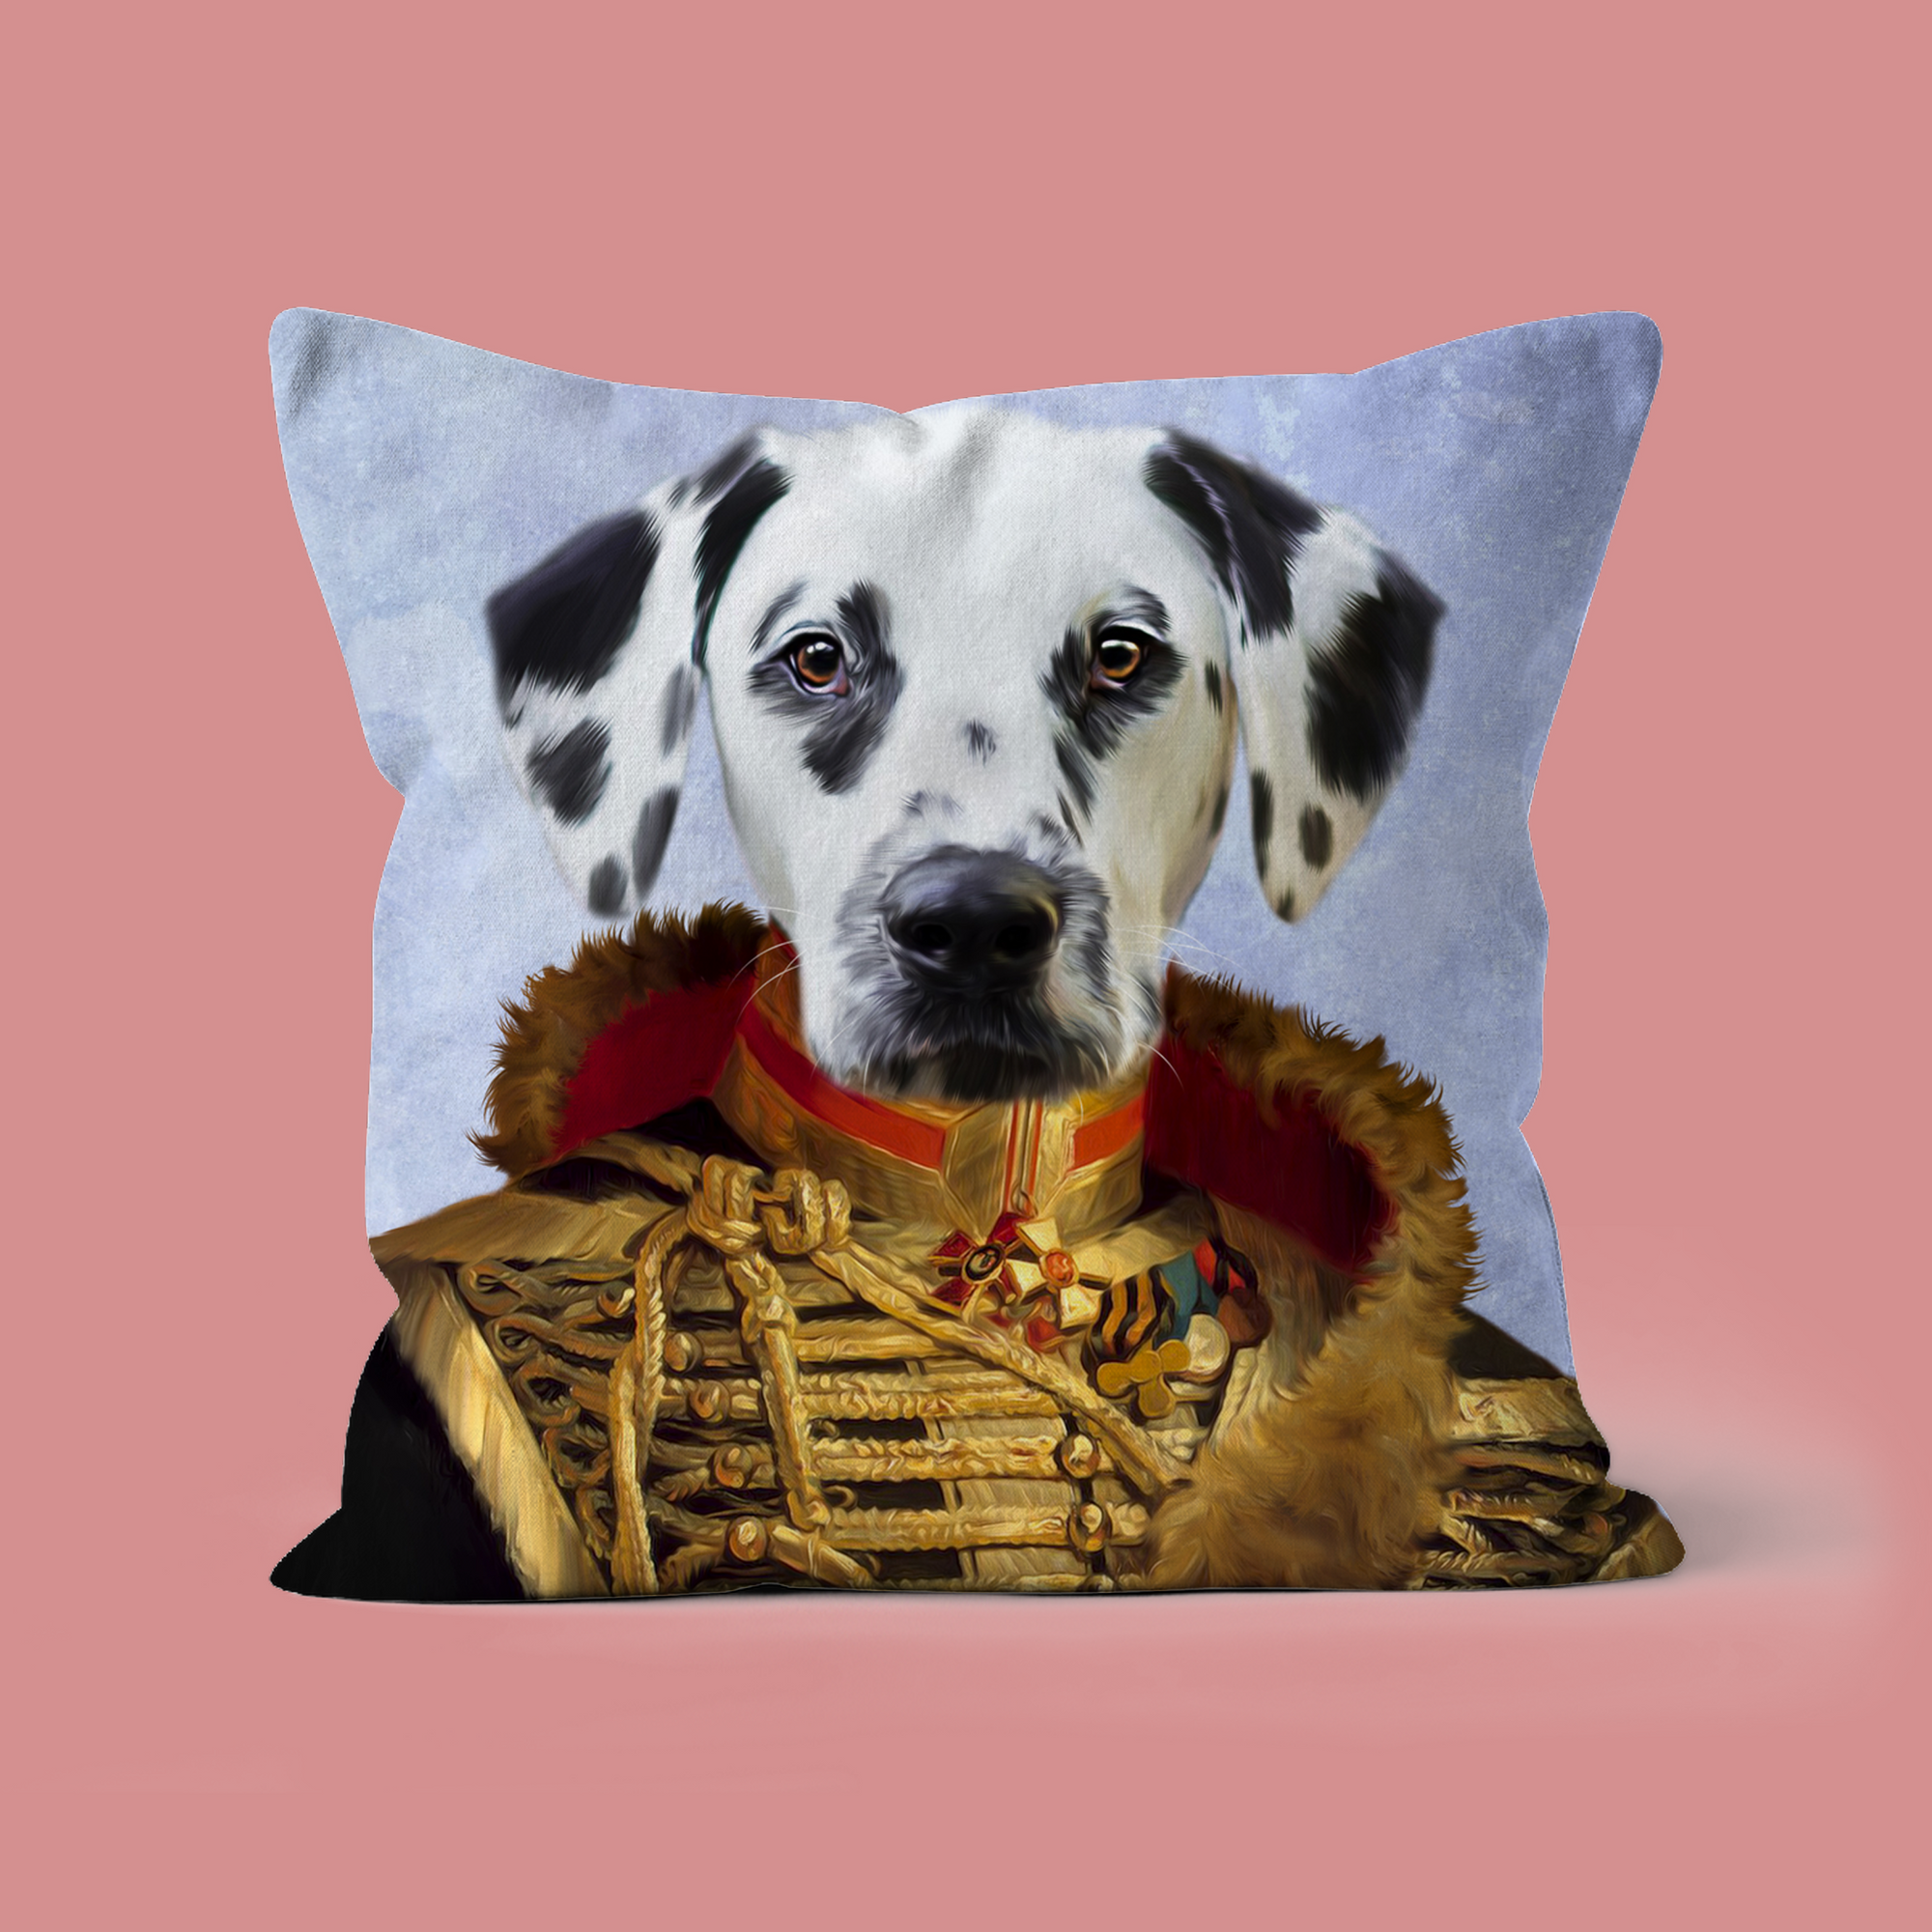 The Colonel: Custom Pet Throw Pillow - Paw & Glory - #pet portraits# - #dog portraits# - #pet portraits uk#paw & glory, pet portraits pillow,custom pet pillows, pillow personalized, custom pillow cover, dog personalized pillow, pillow with pet picture